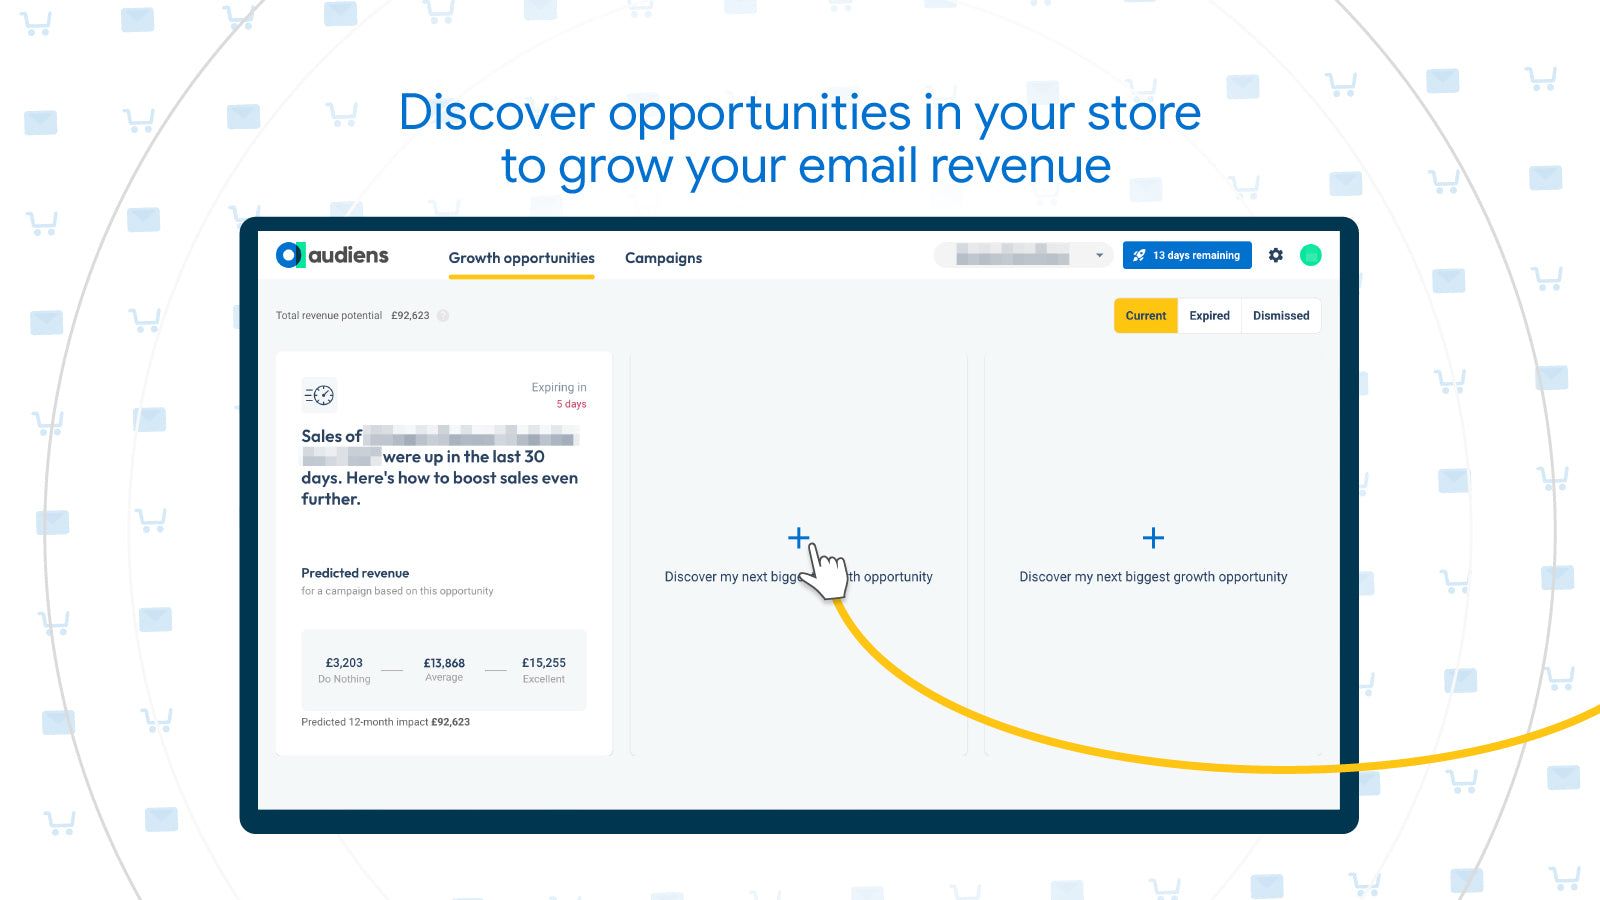 Discover growth opportunities to grow email revenue